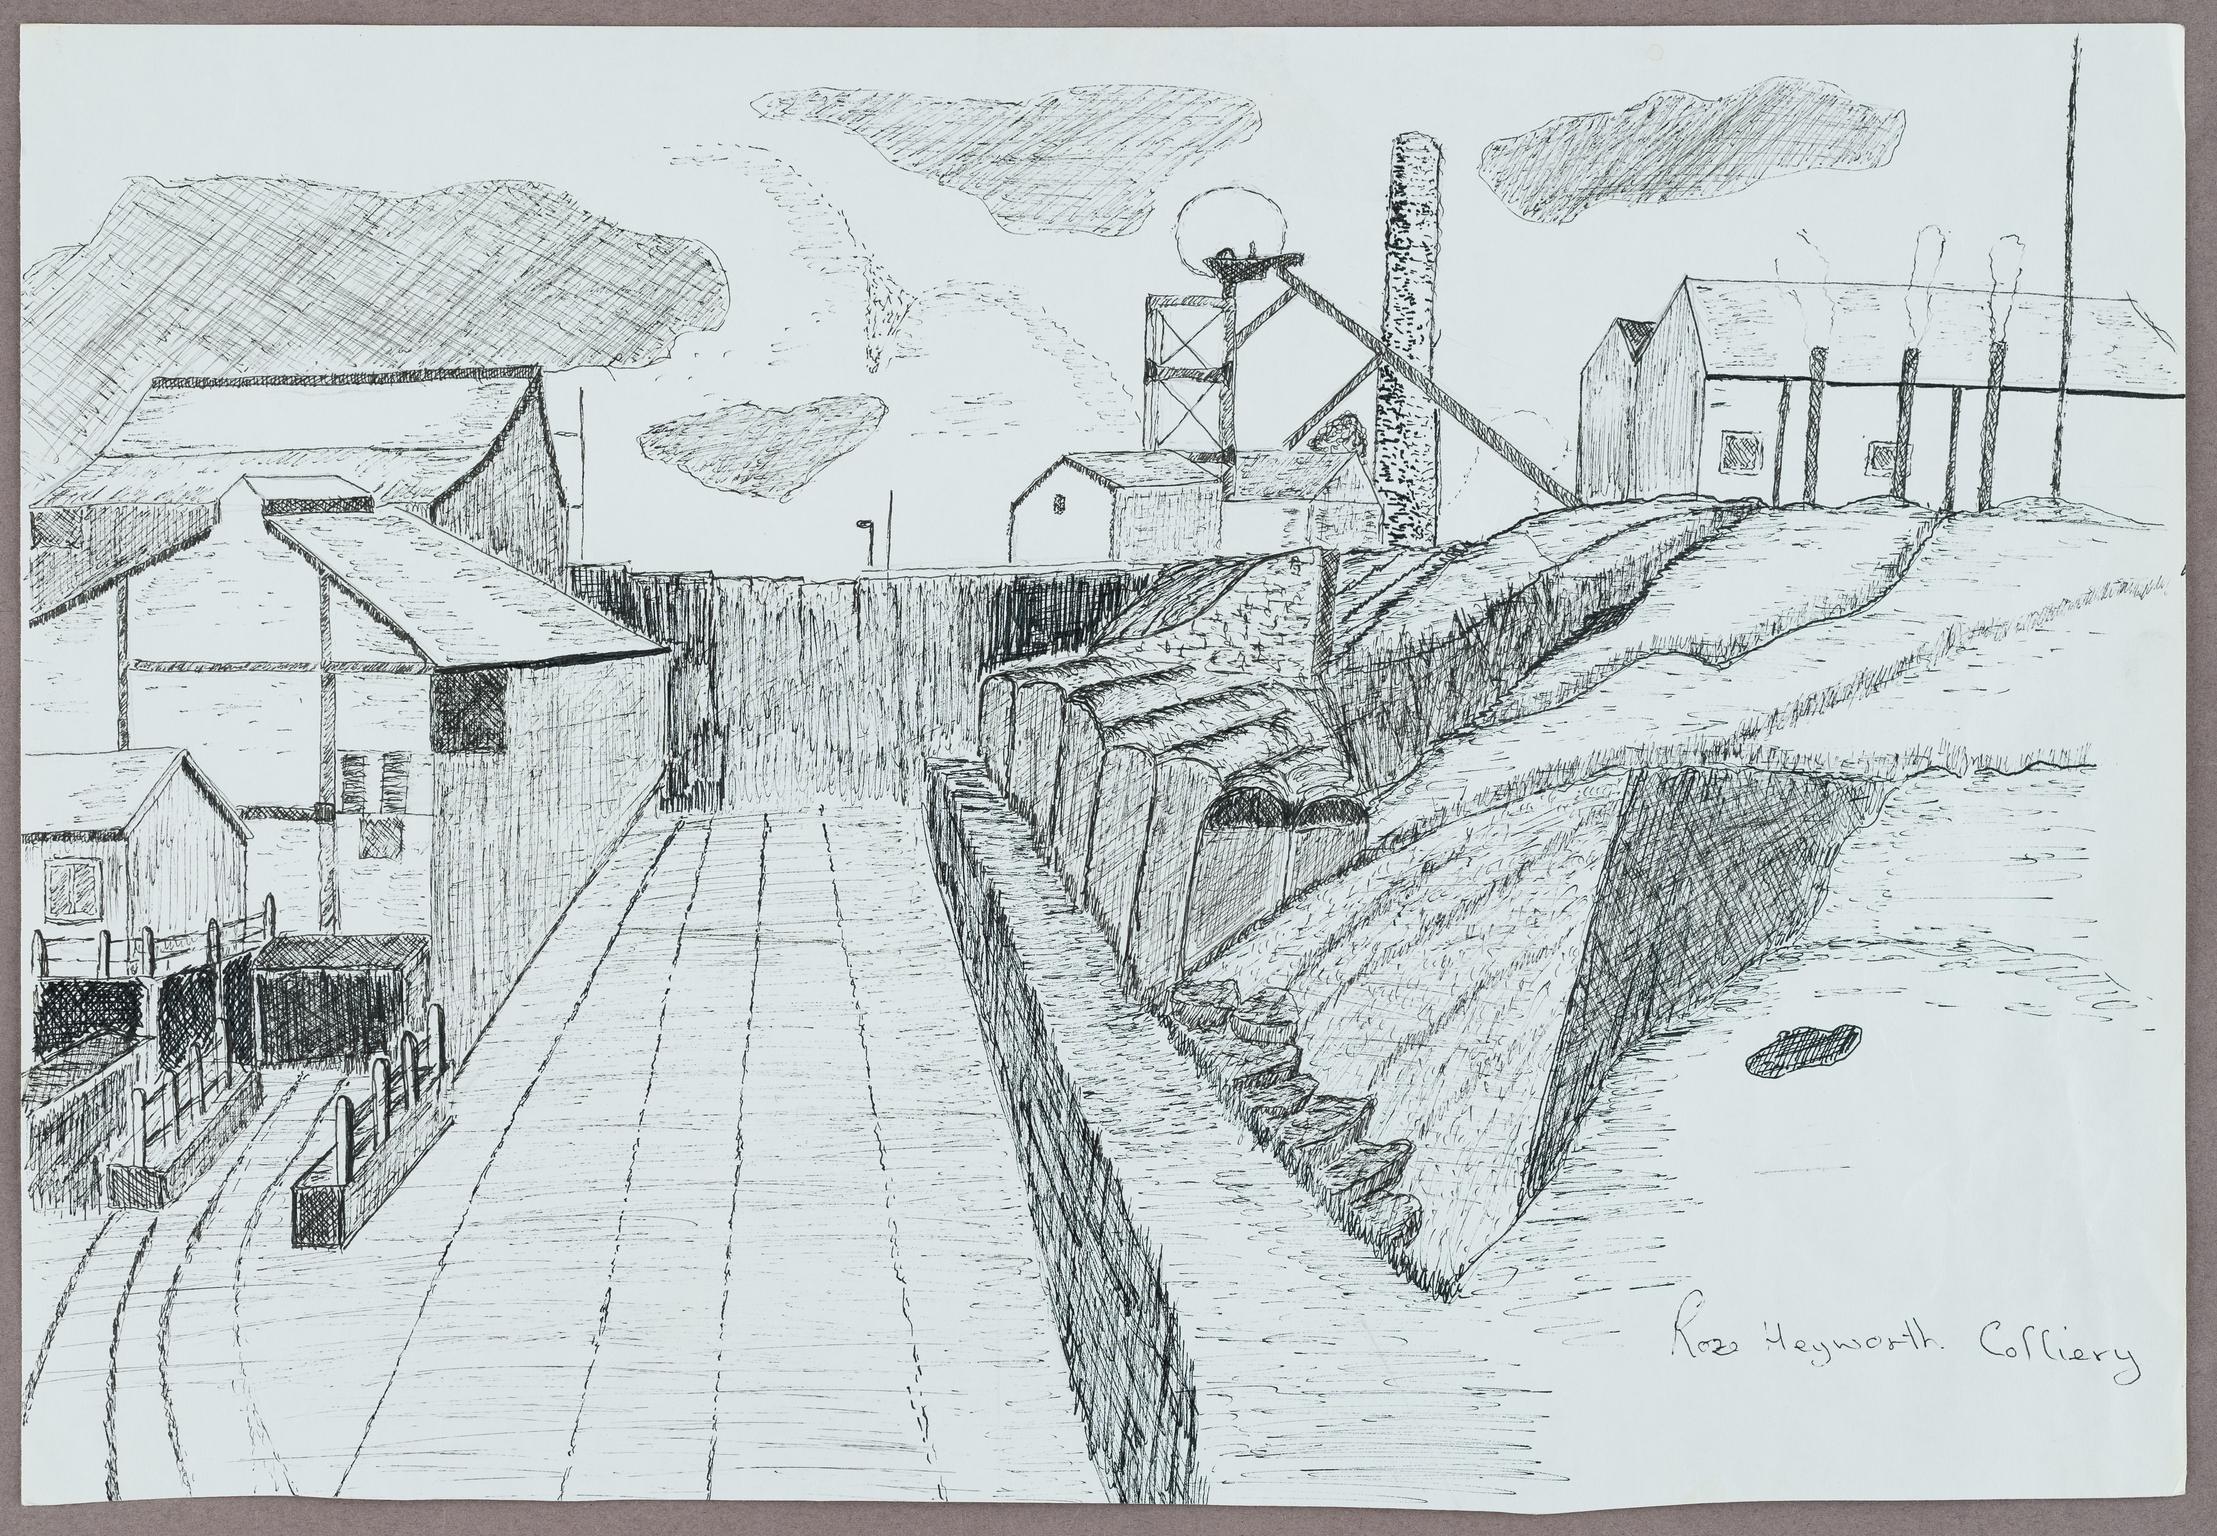 Rose Heyworth Colliery (drawing)